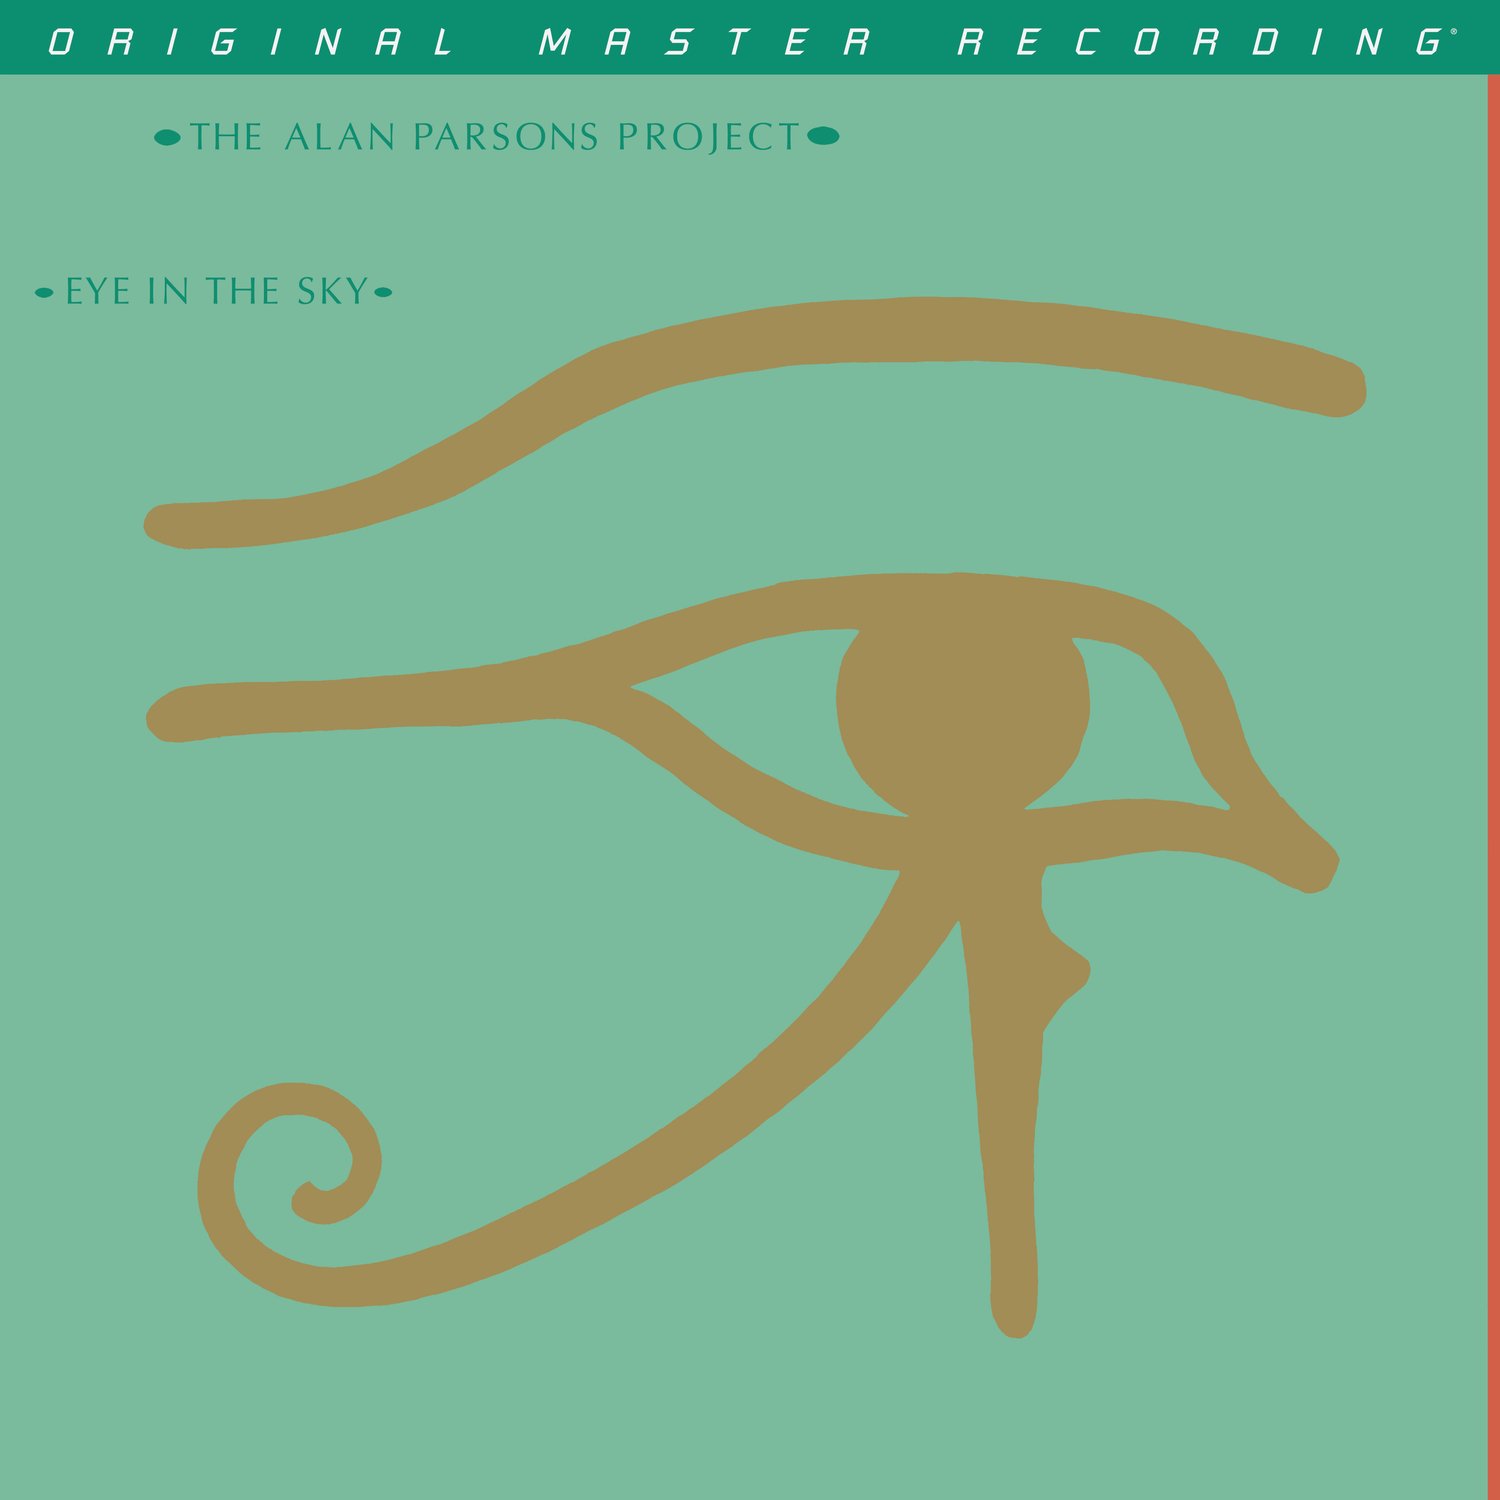 The Alan Parsons Project – Eye In The Sky (1982) [MFSL 2021] SACD ISO + DSF DSD64 + Hi-Res FLAC